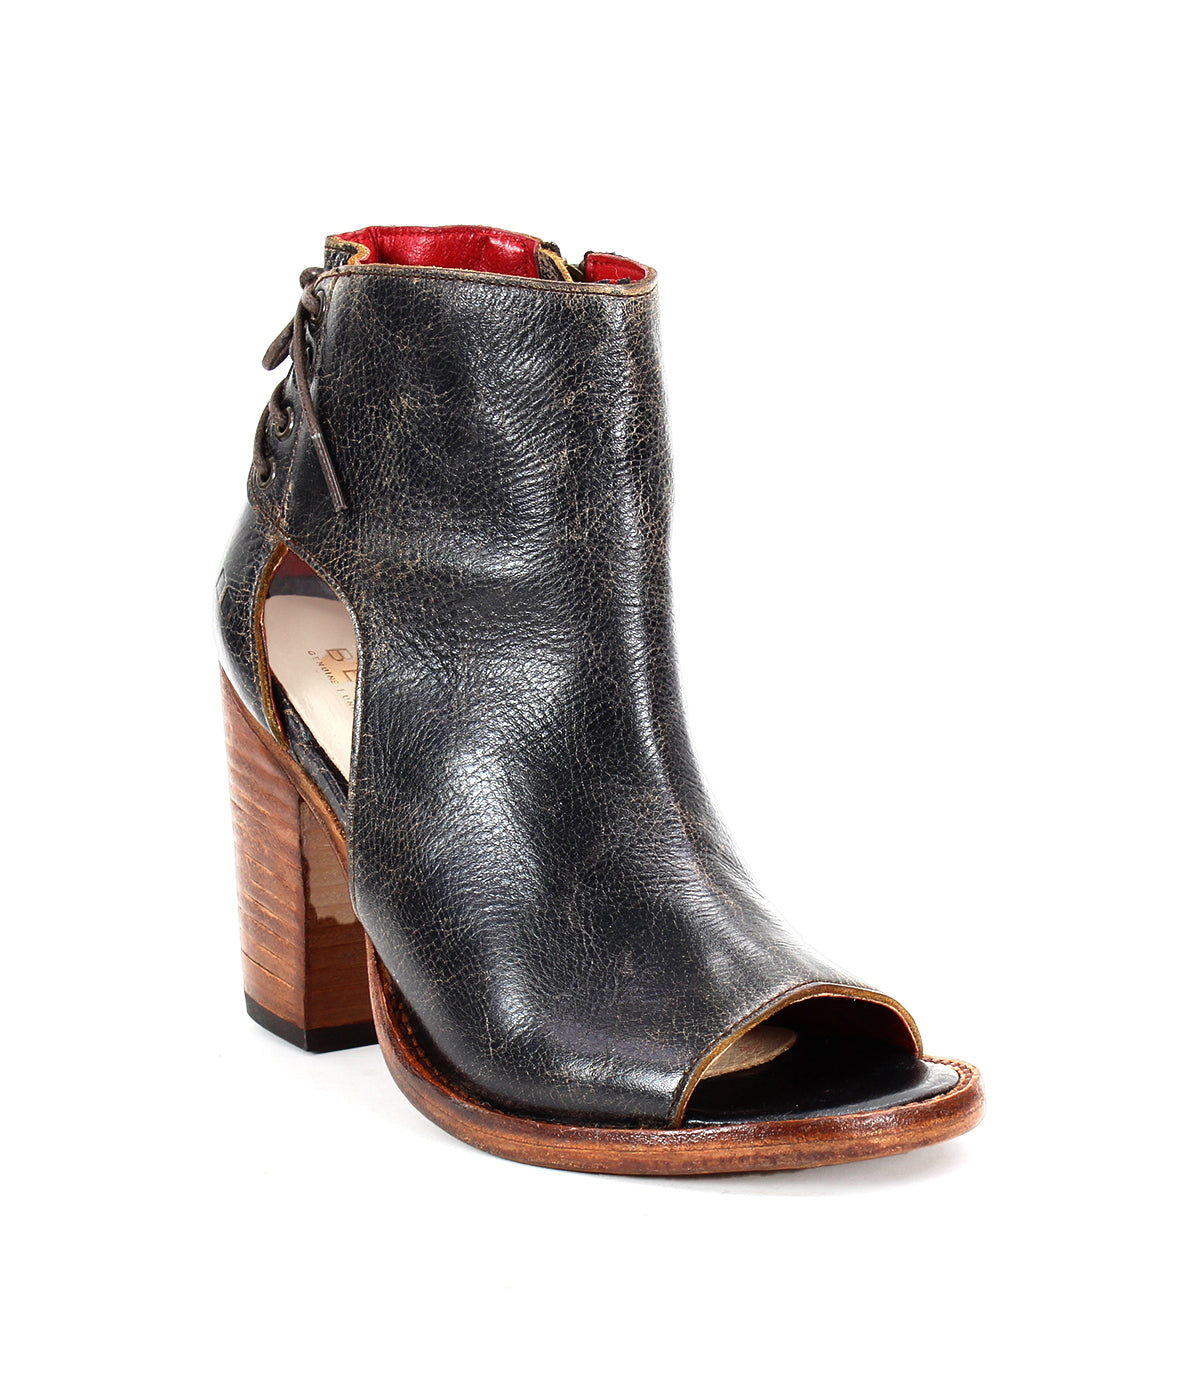 A women's black leather ankle boot with elegant back lacing and a wooden heel, the Angelique II by Bed Stu.